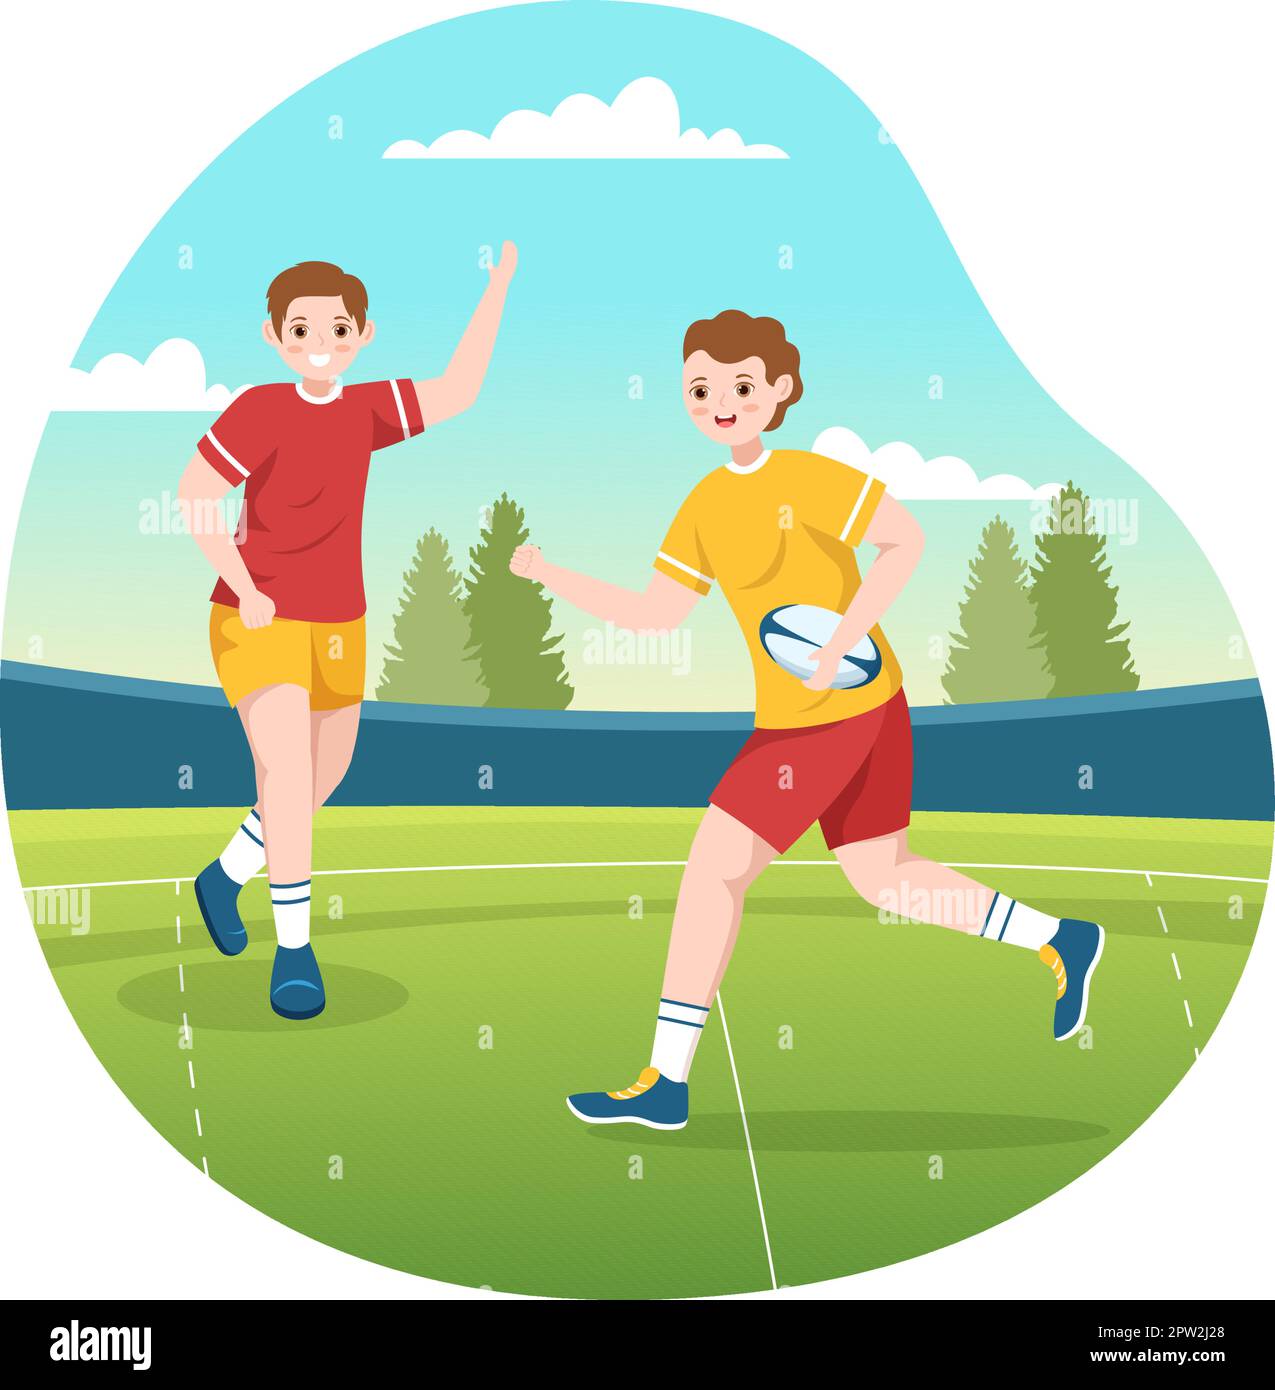 Rugby Player Running Illustration with a Ball in Championship Sport for Web Banner or Landing Page in Flat Cartoon Hand Drawn Templates Stock Vector